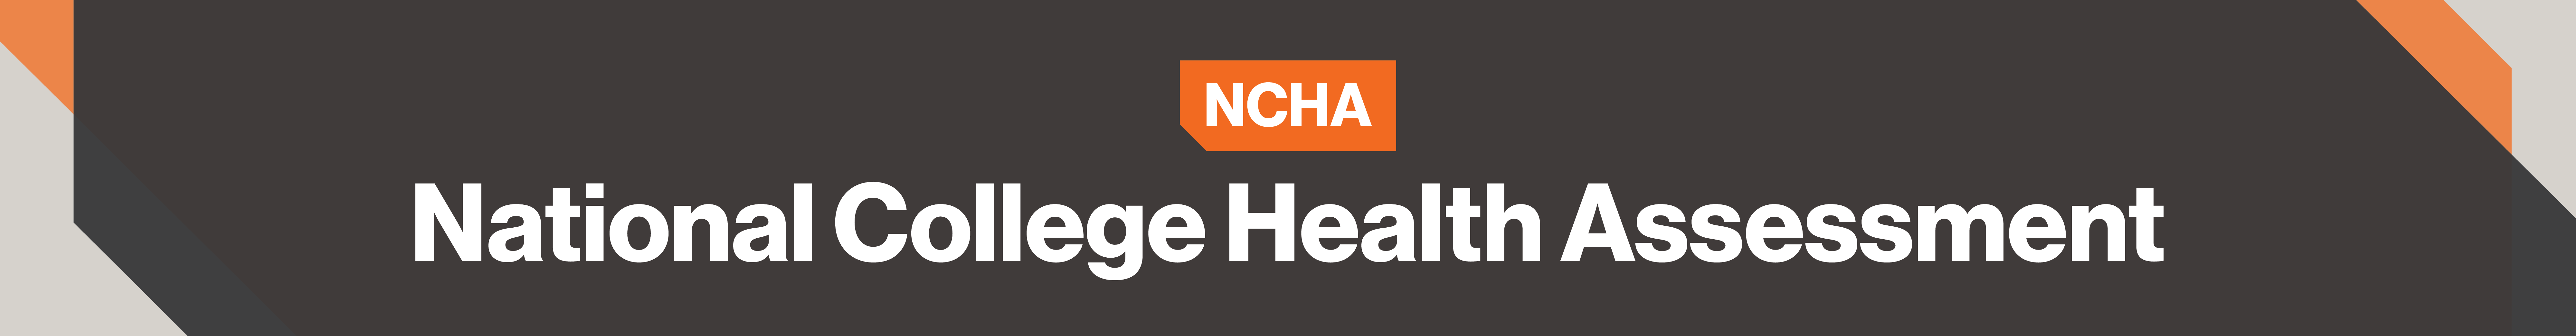 NCHA National College Health Assessment 2021